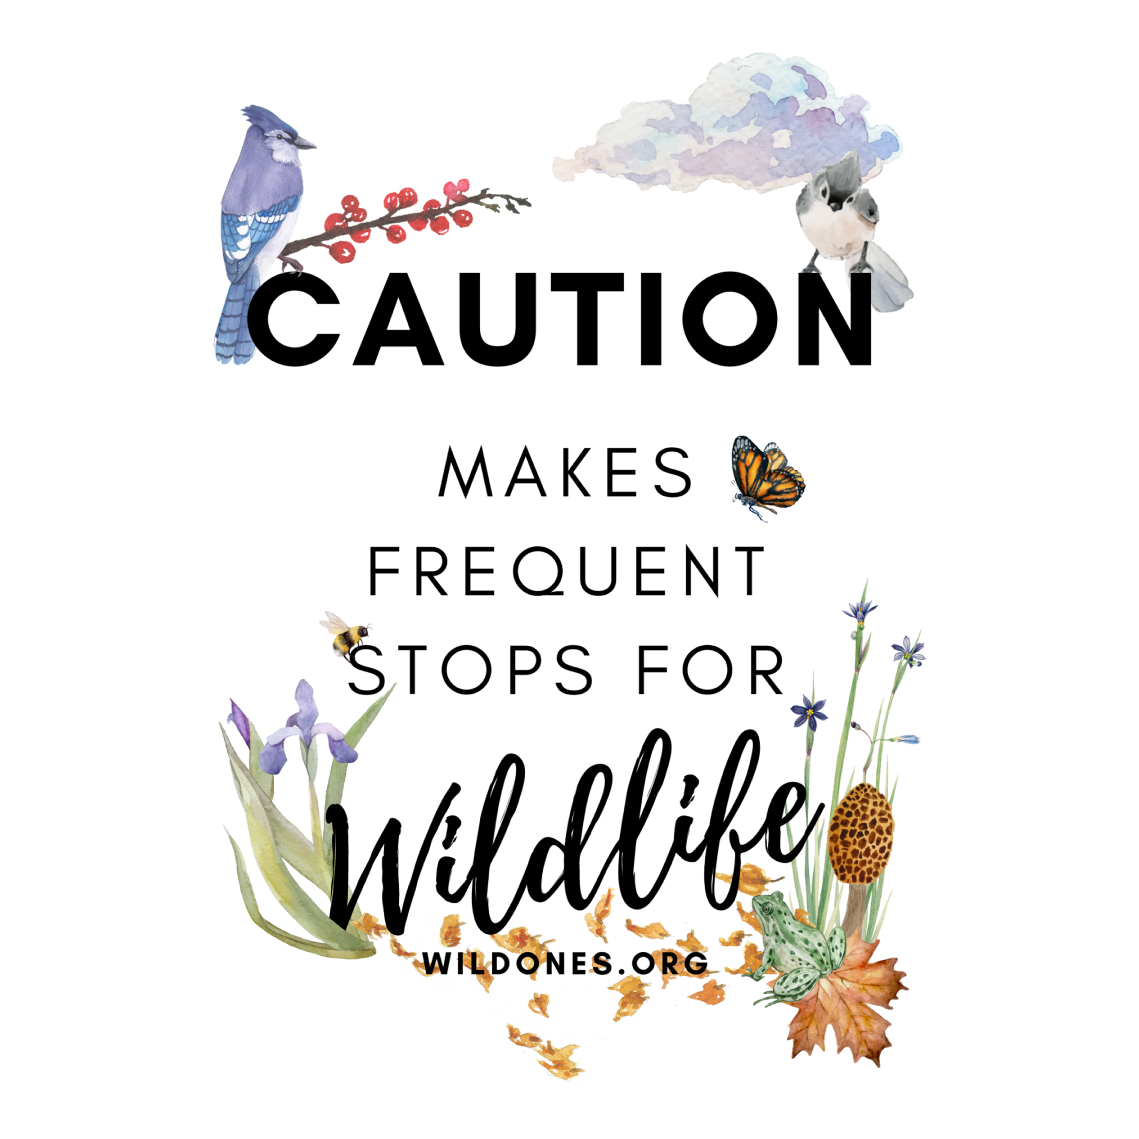 Caution: Makes Frequent Stops for Wildlife shirt design - zoomed